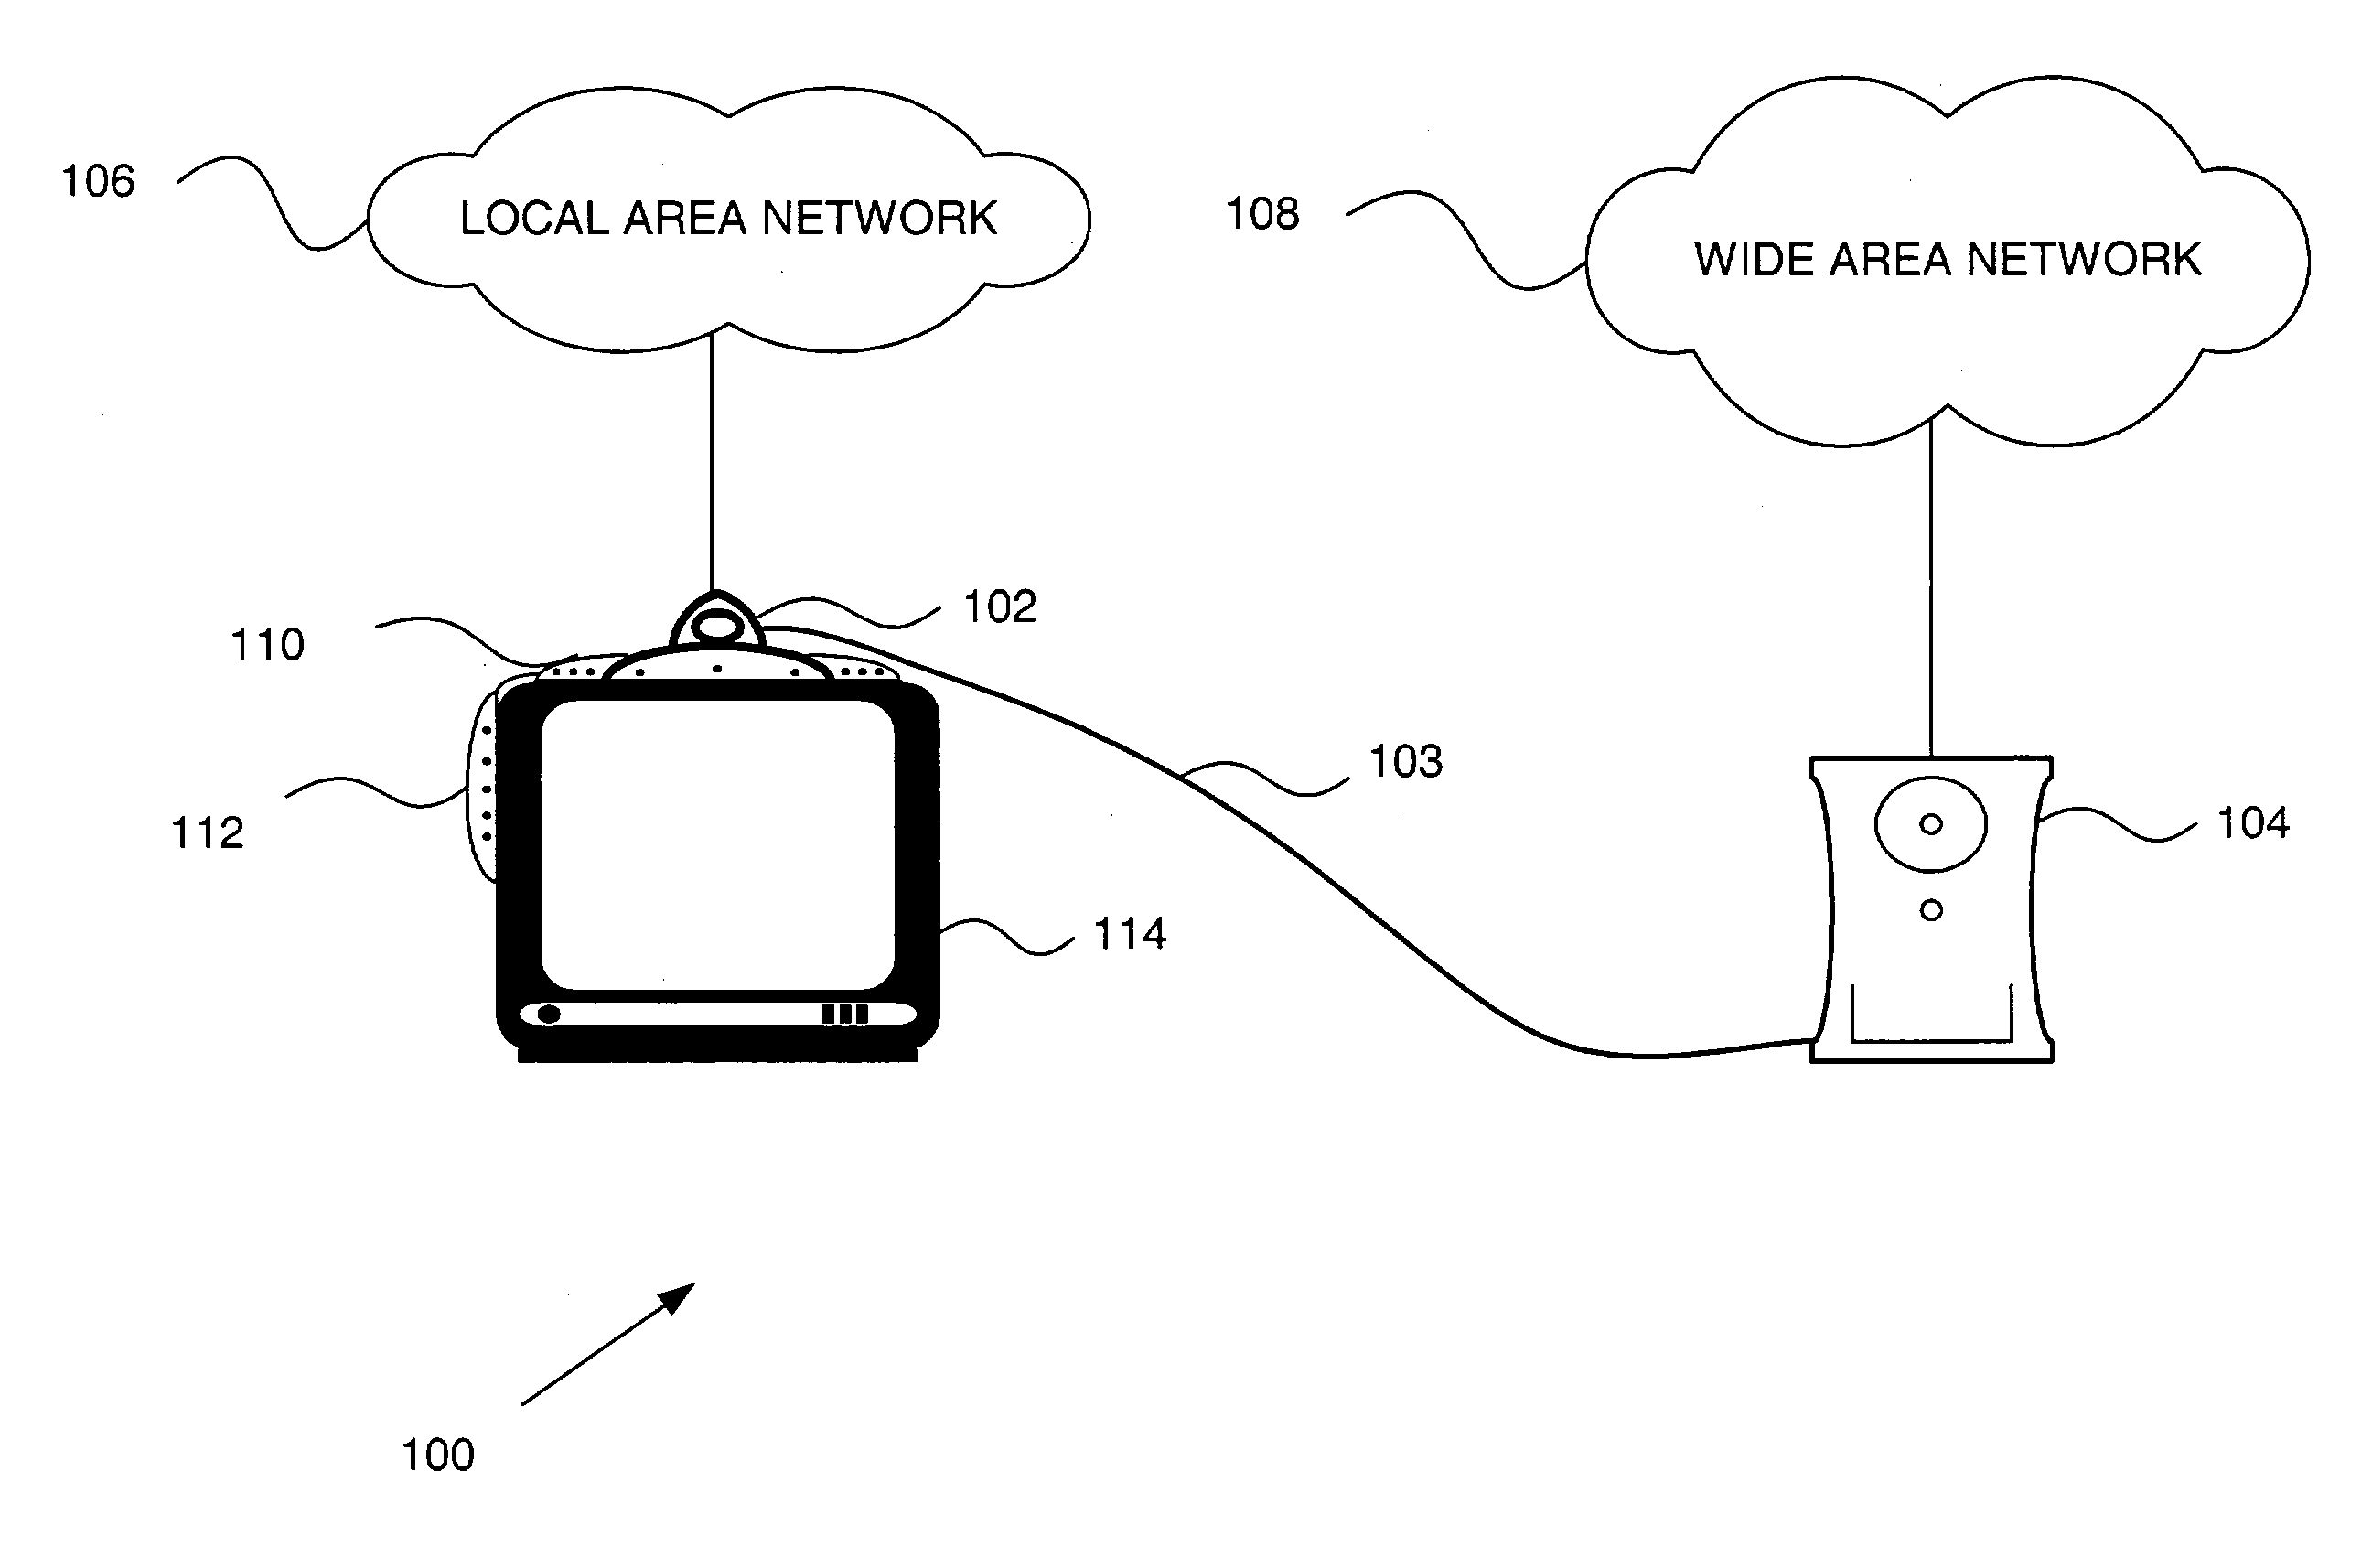 Conferencing system with integrated audio driver and network interface device